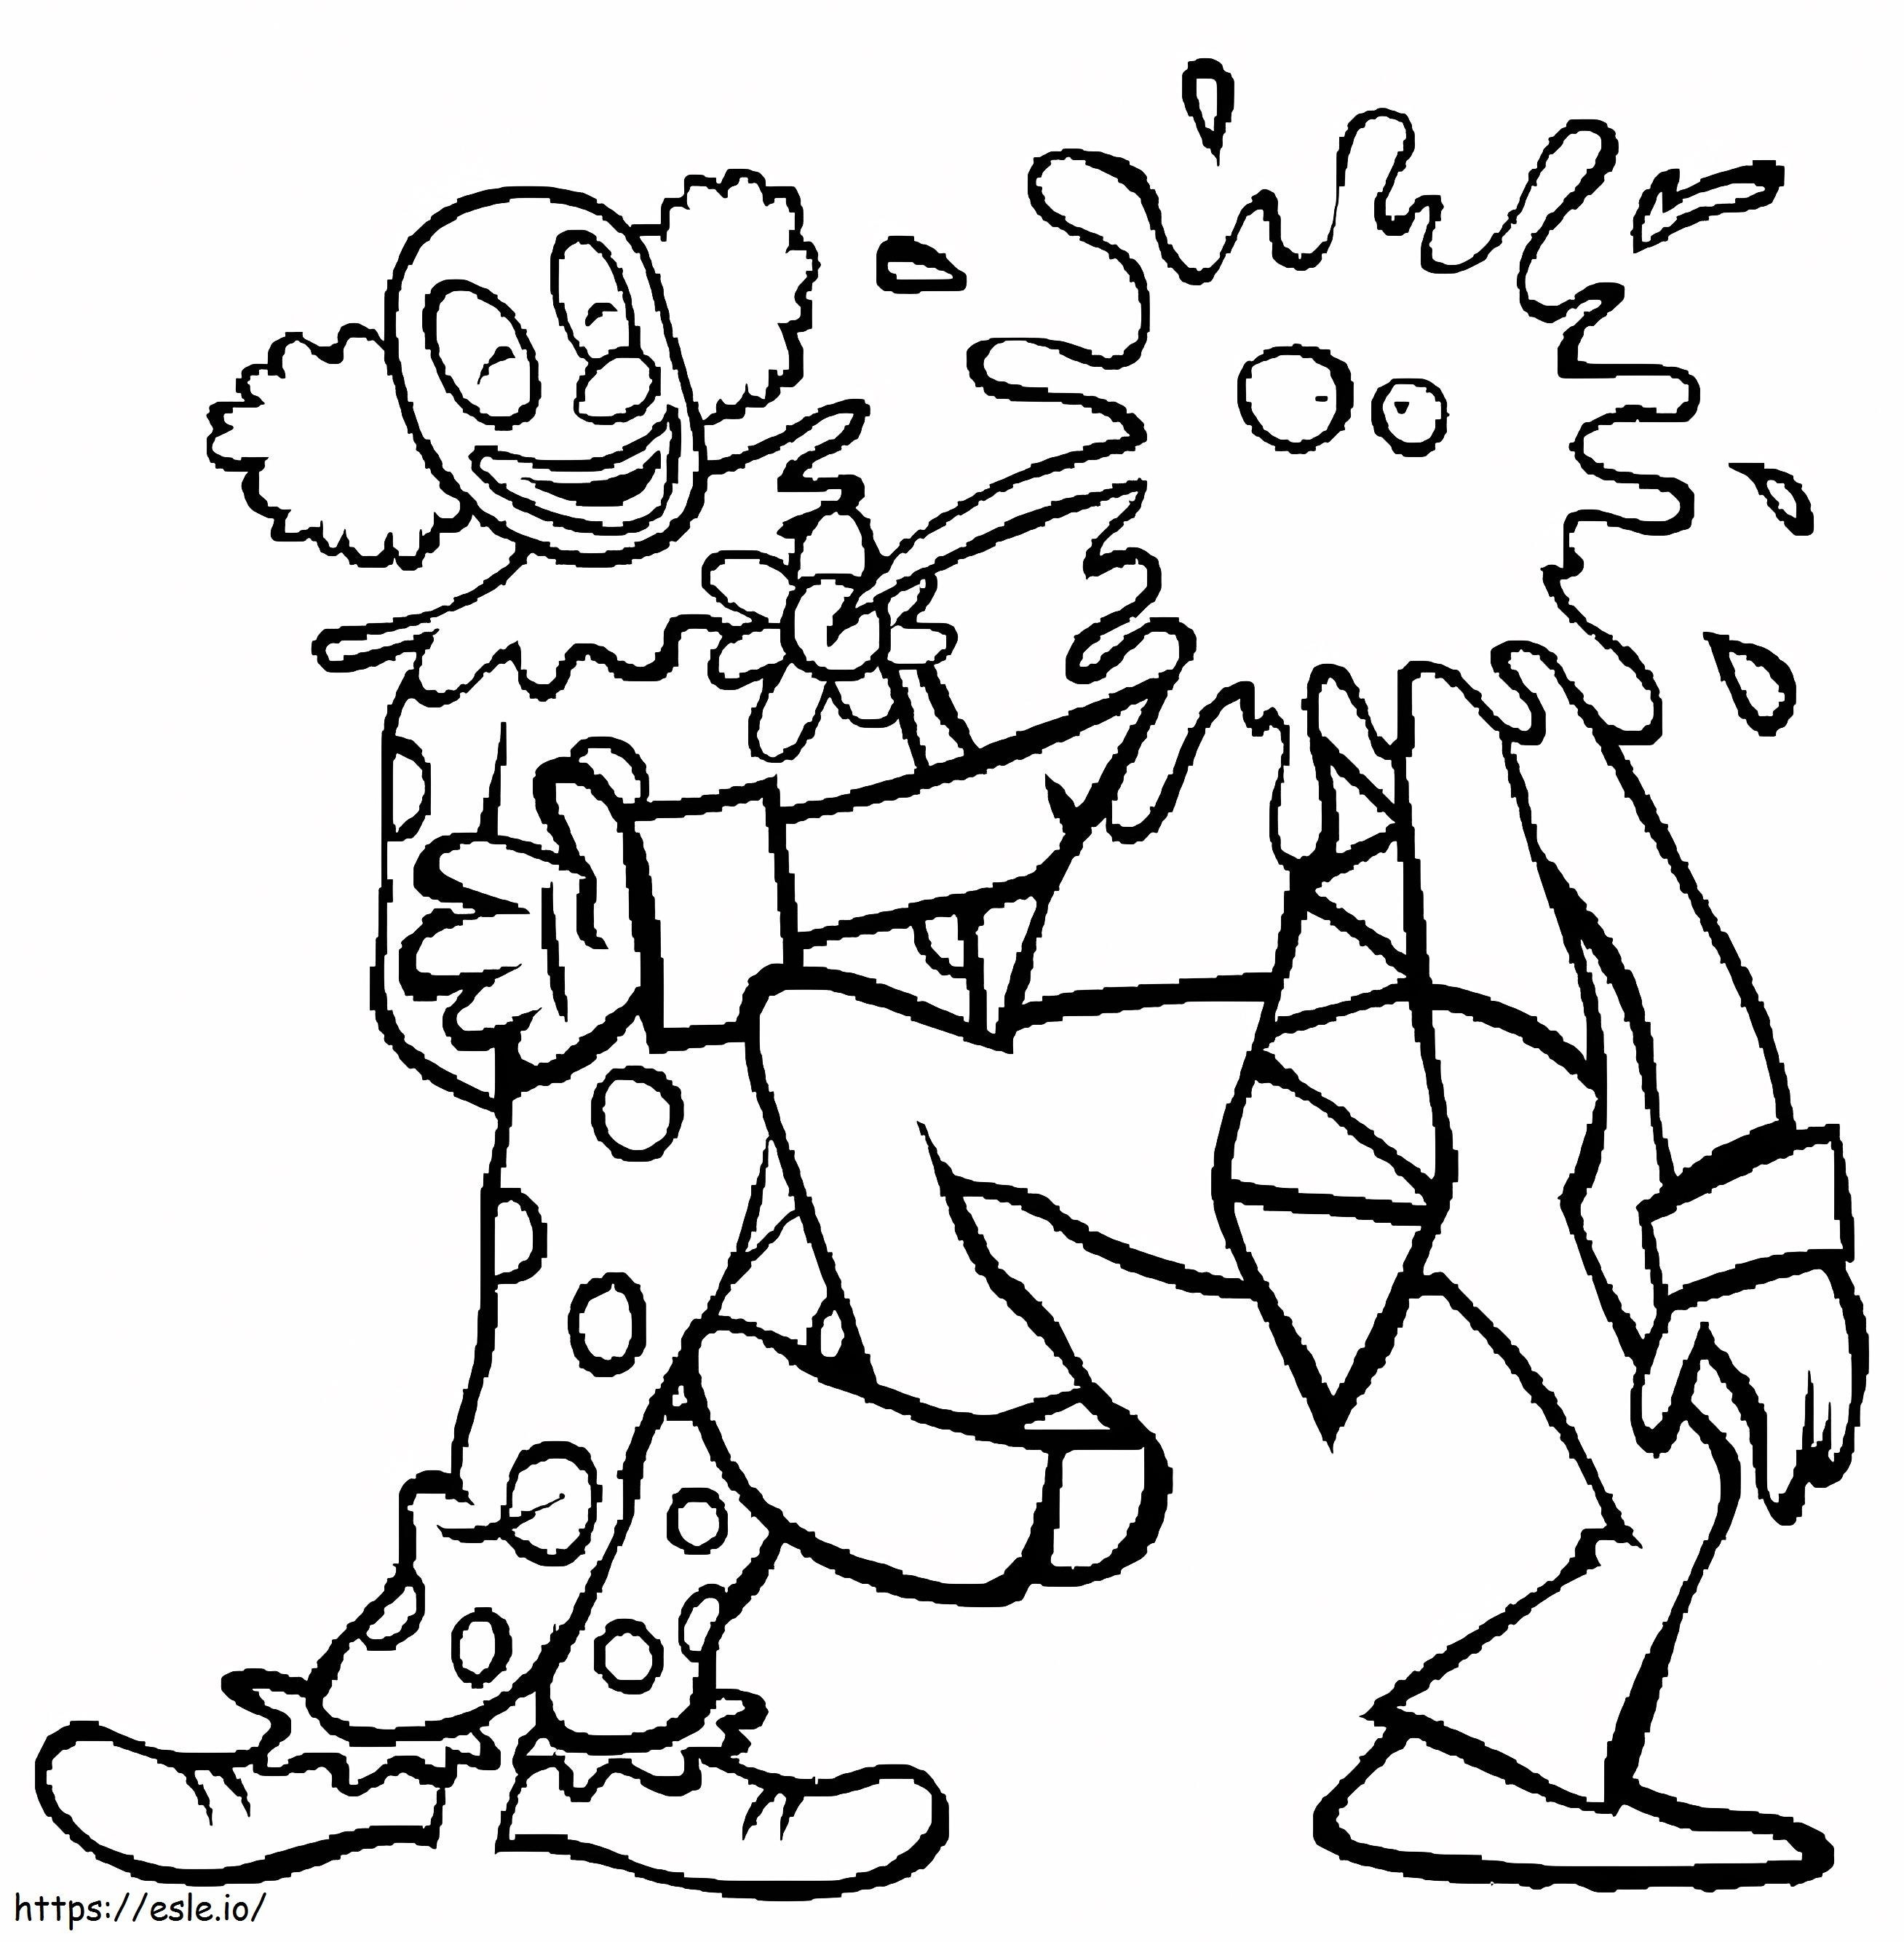 Troll Clown coloring page